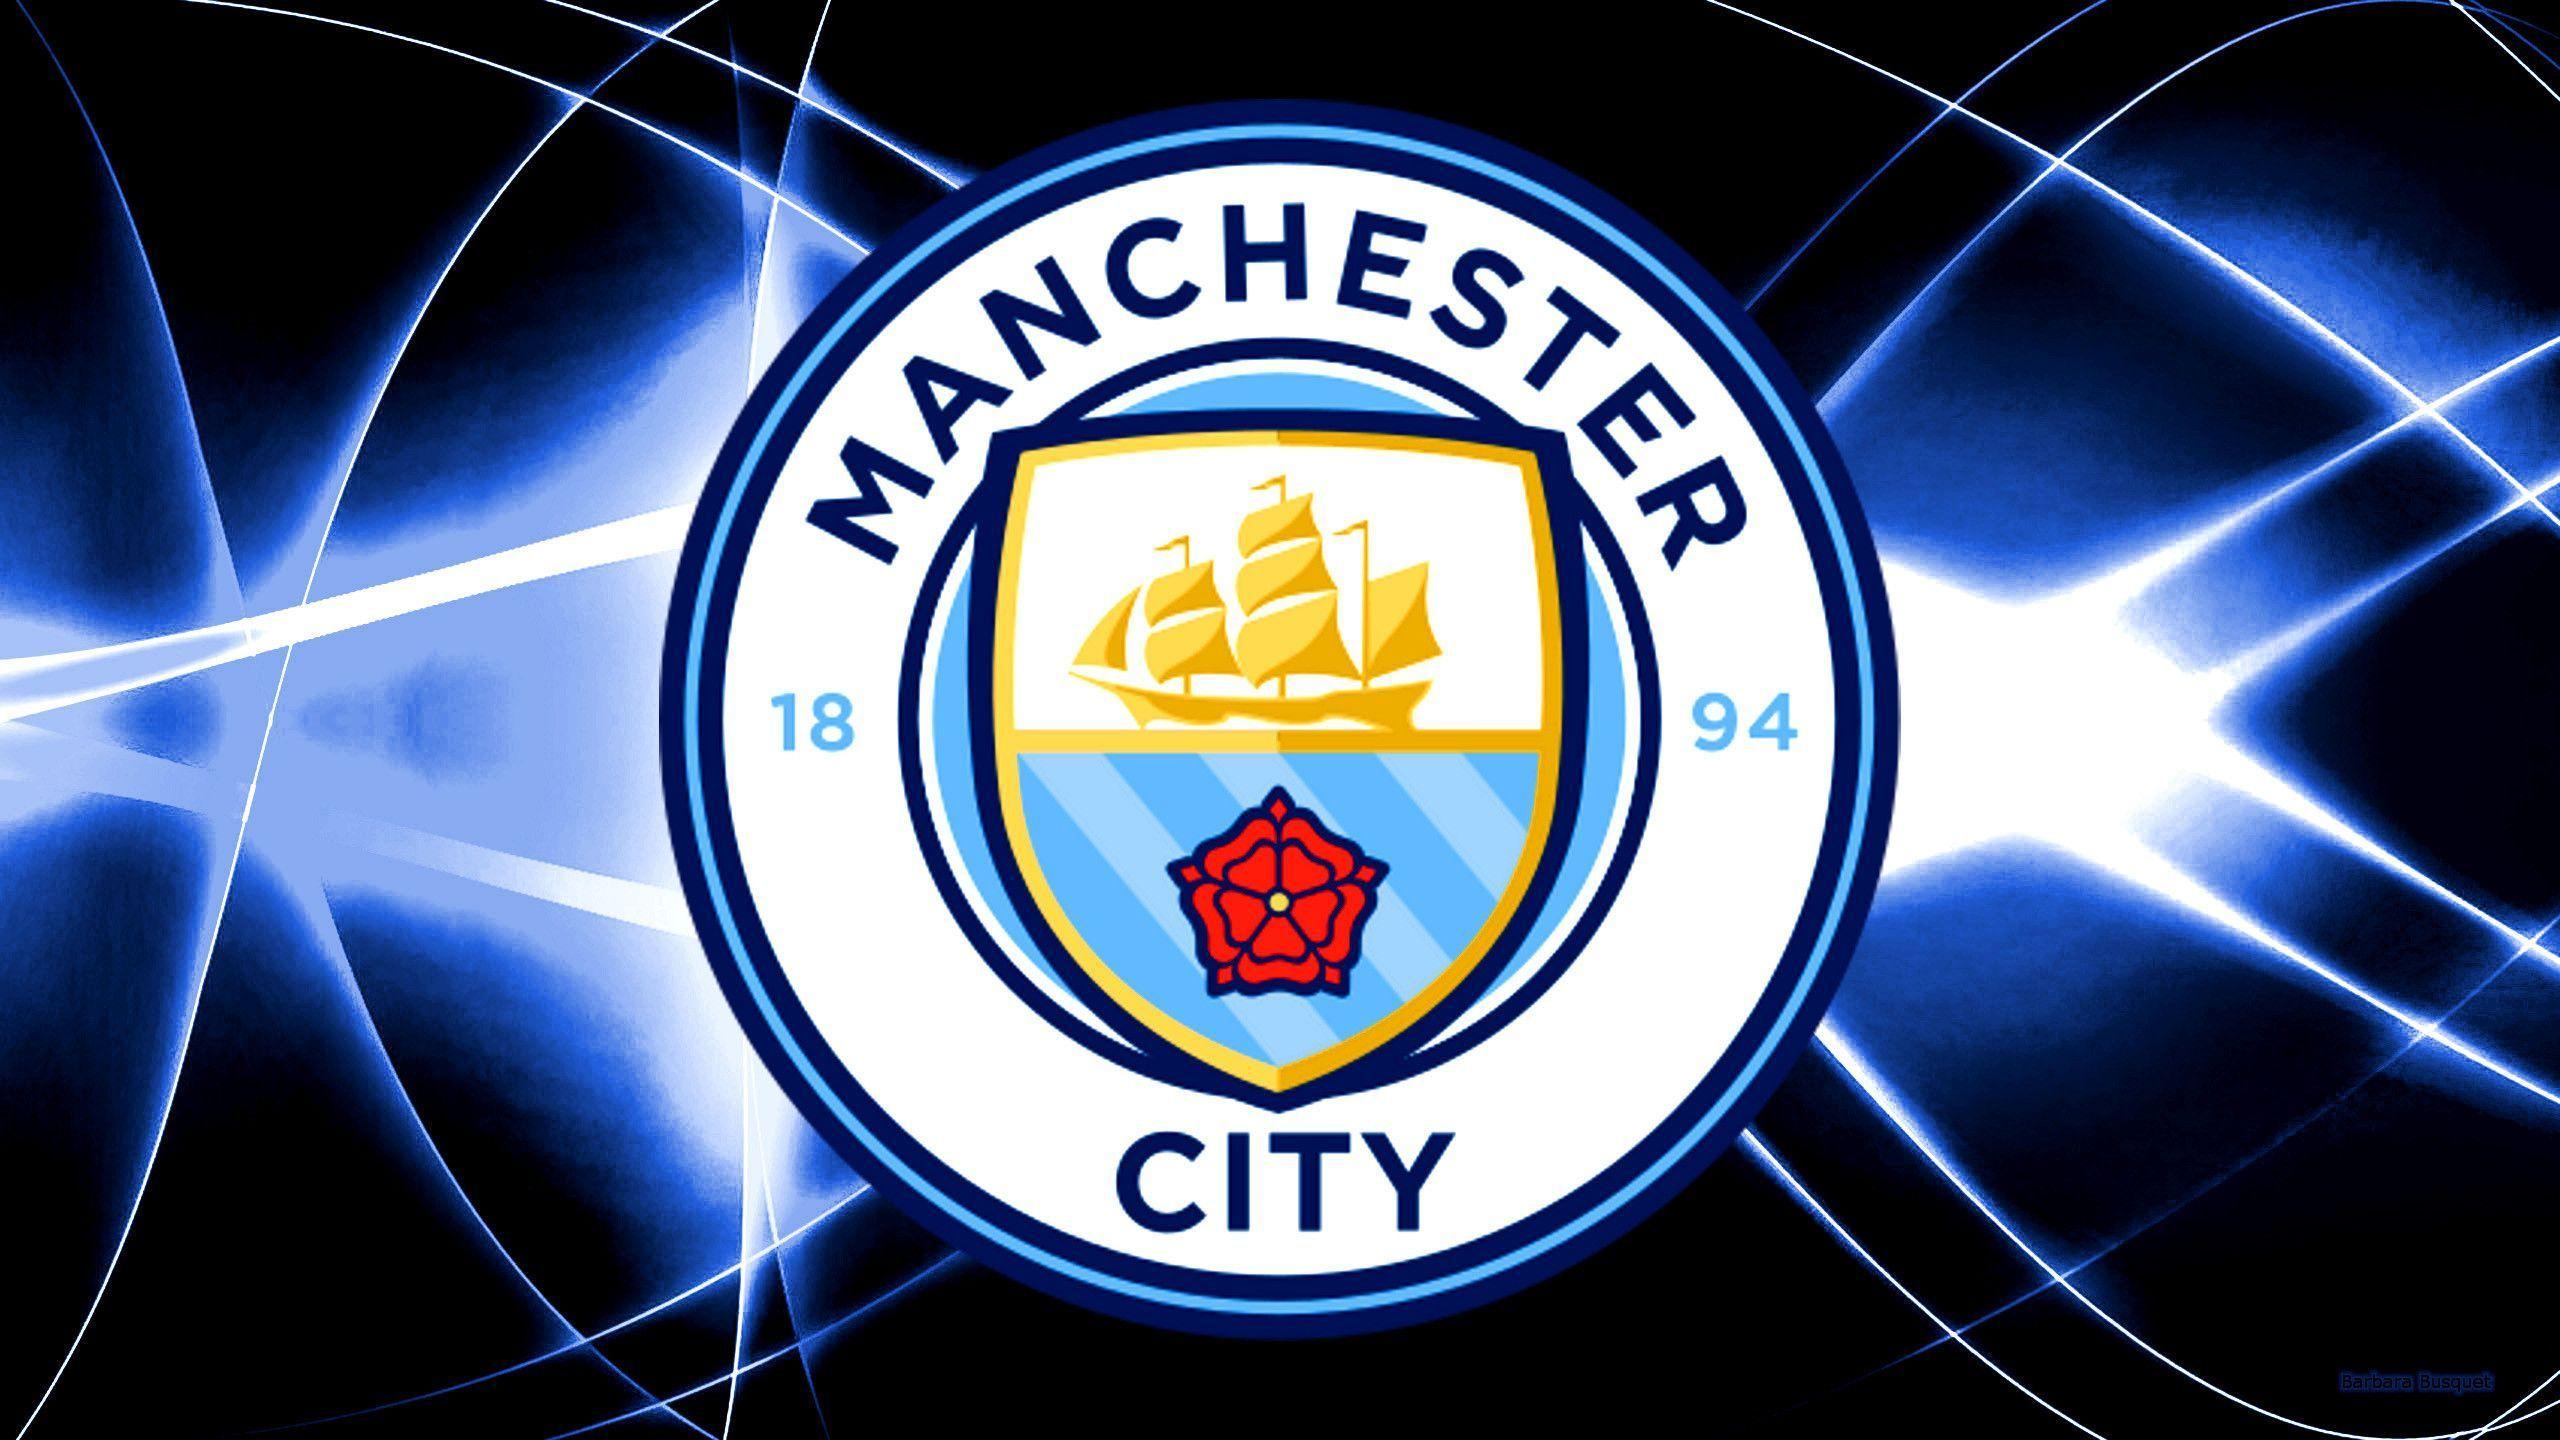 Manchester City Logo Wallpapers - Top Free Manchester City Logo ...